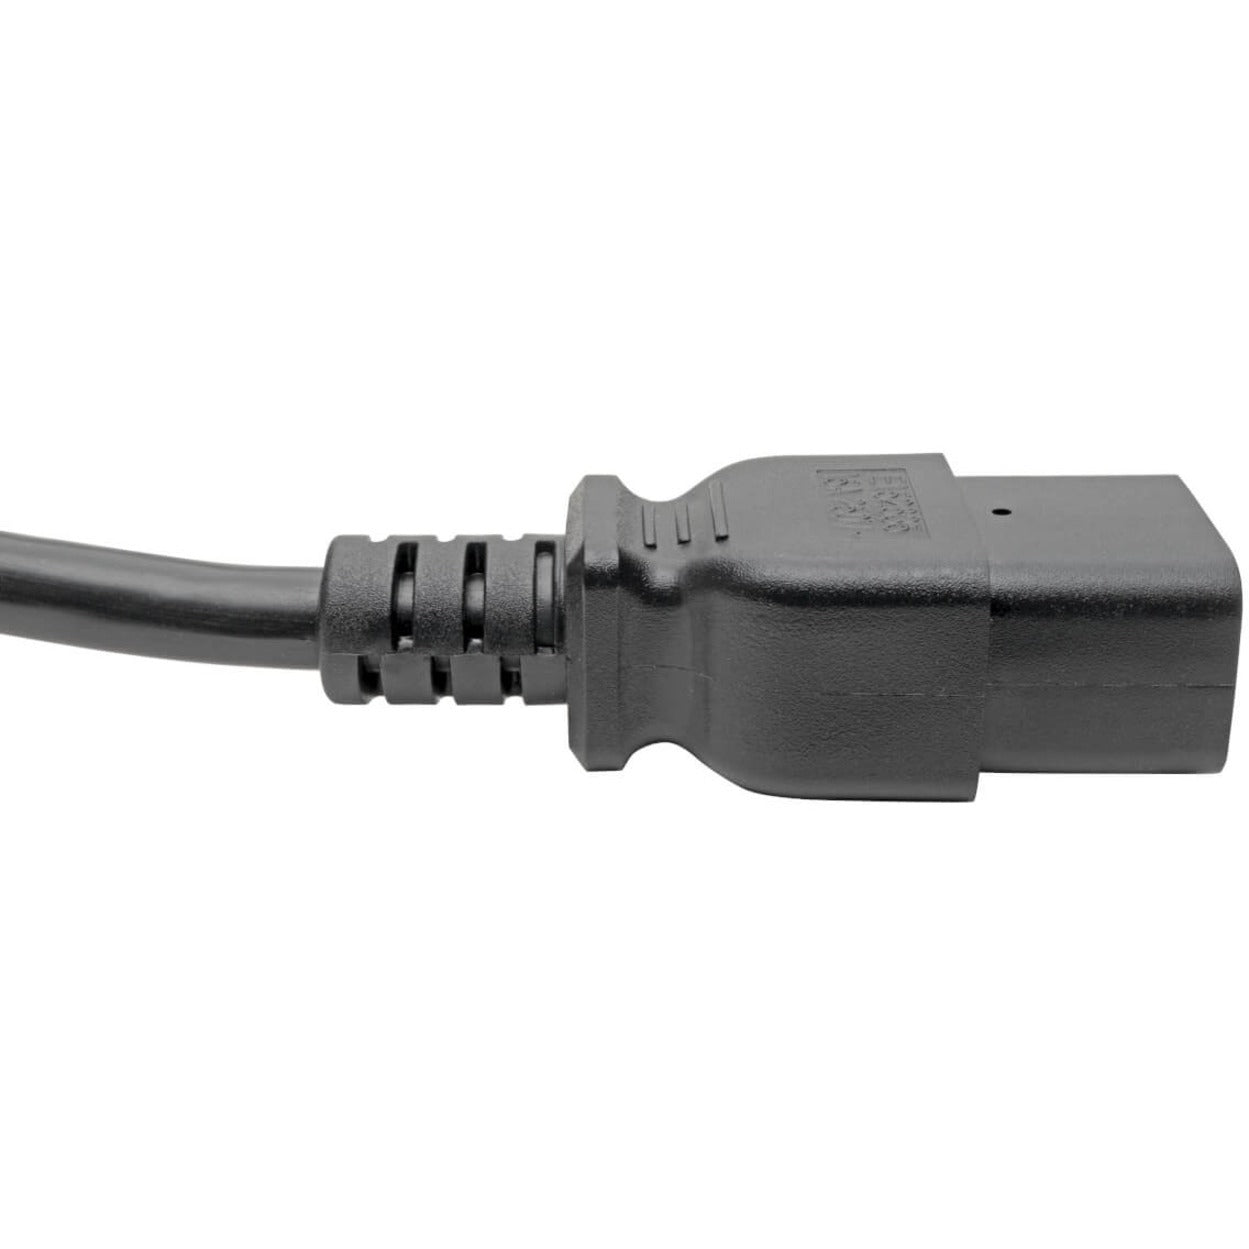 Tripp Lite P047-004 Power Interconnect Cable, 4 ft, 15A, 250V AC